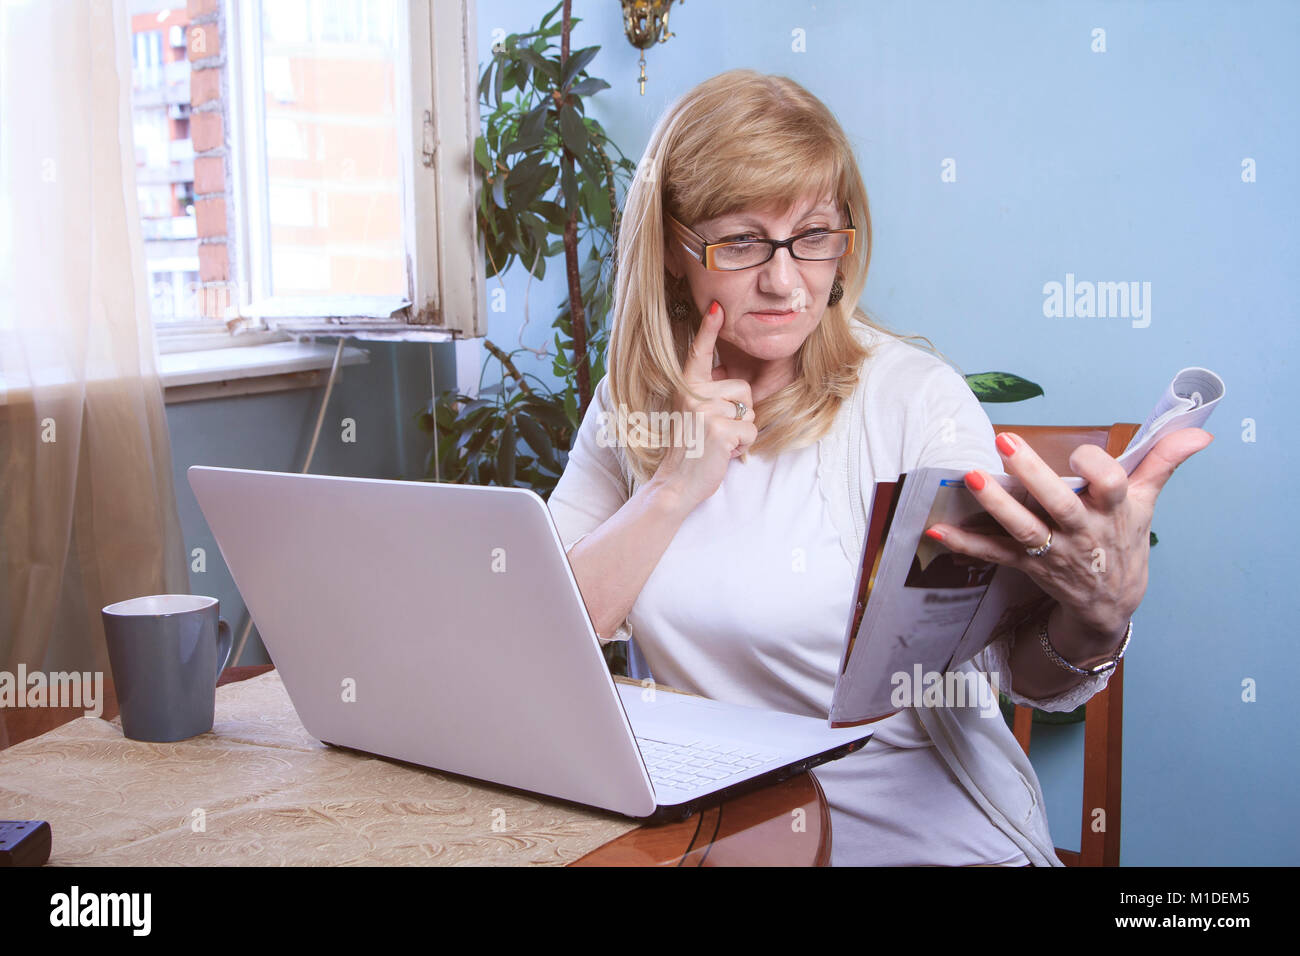 Reading a magazine and browsing computer Stock Photo